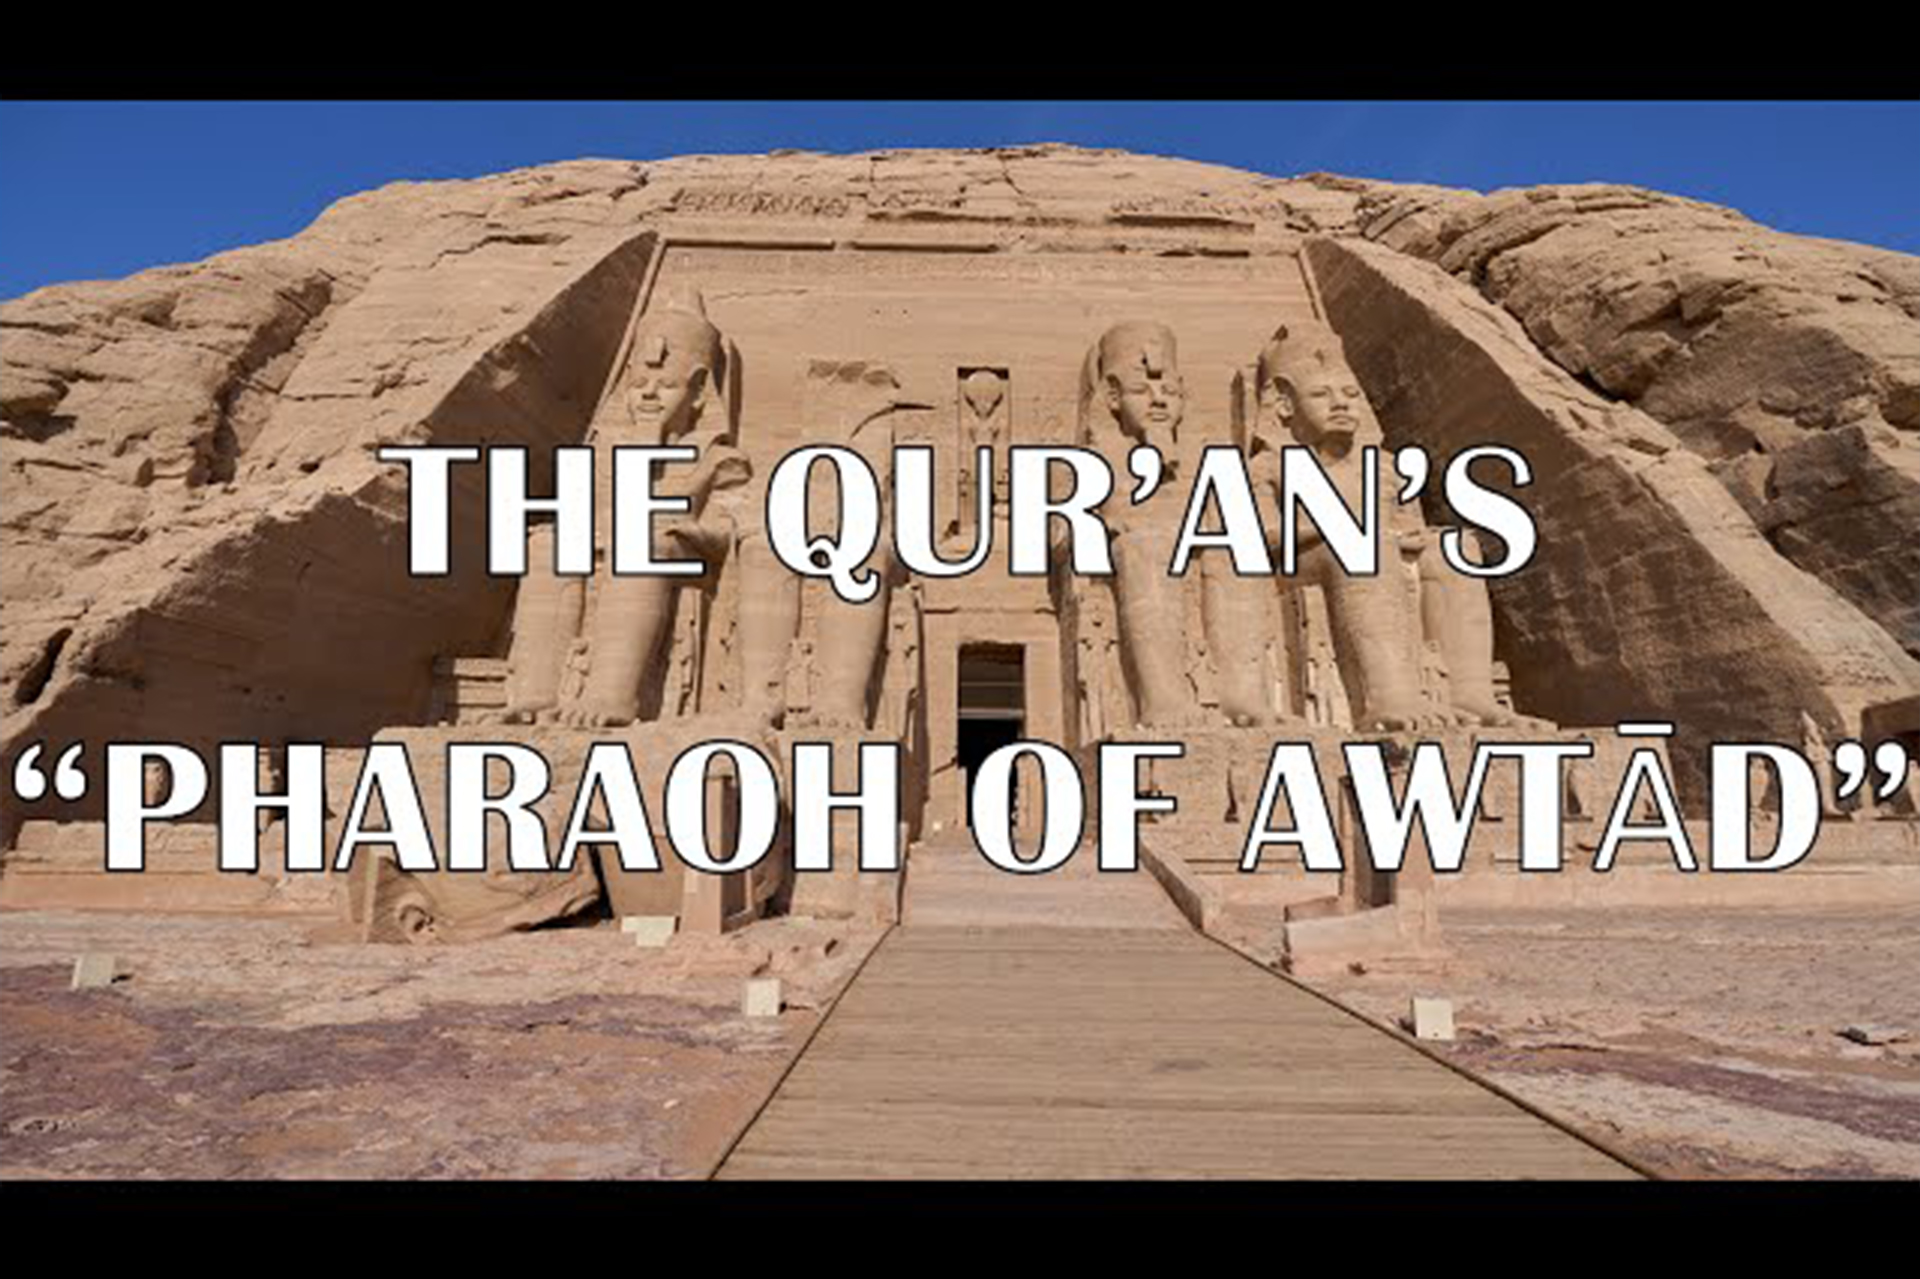 The Qur’an’s “Pharaoh of Awtad”